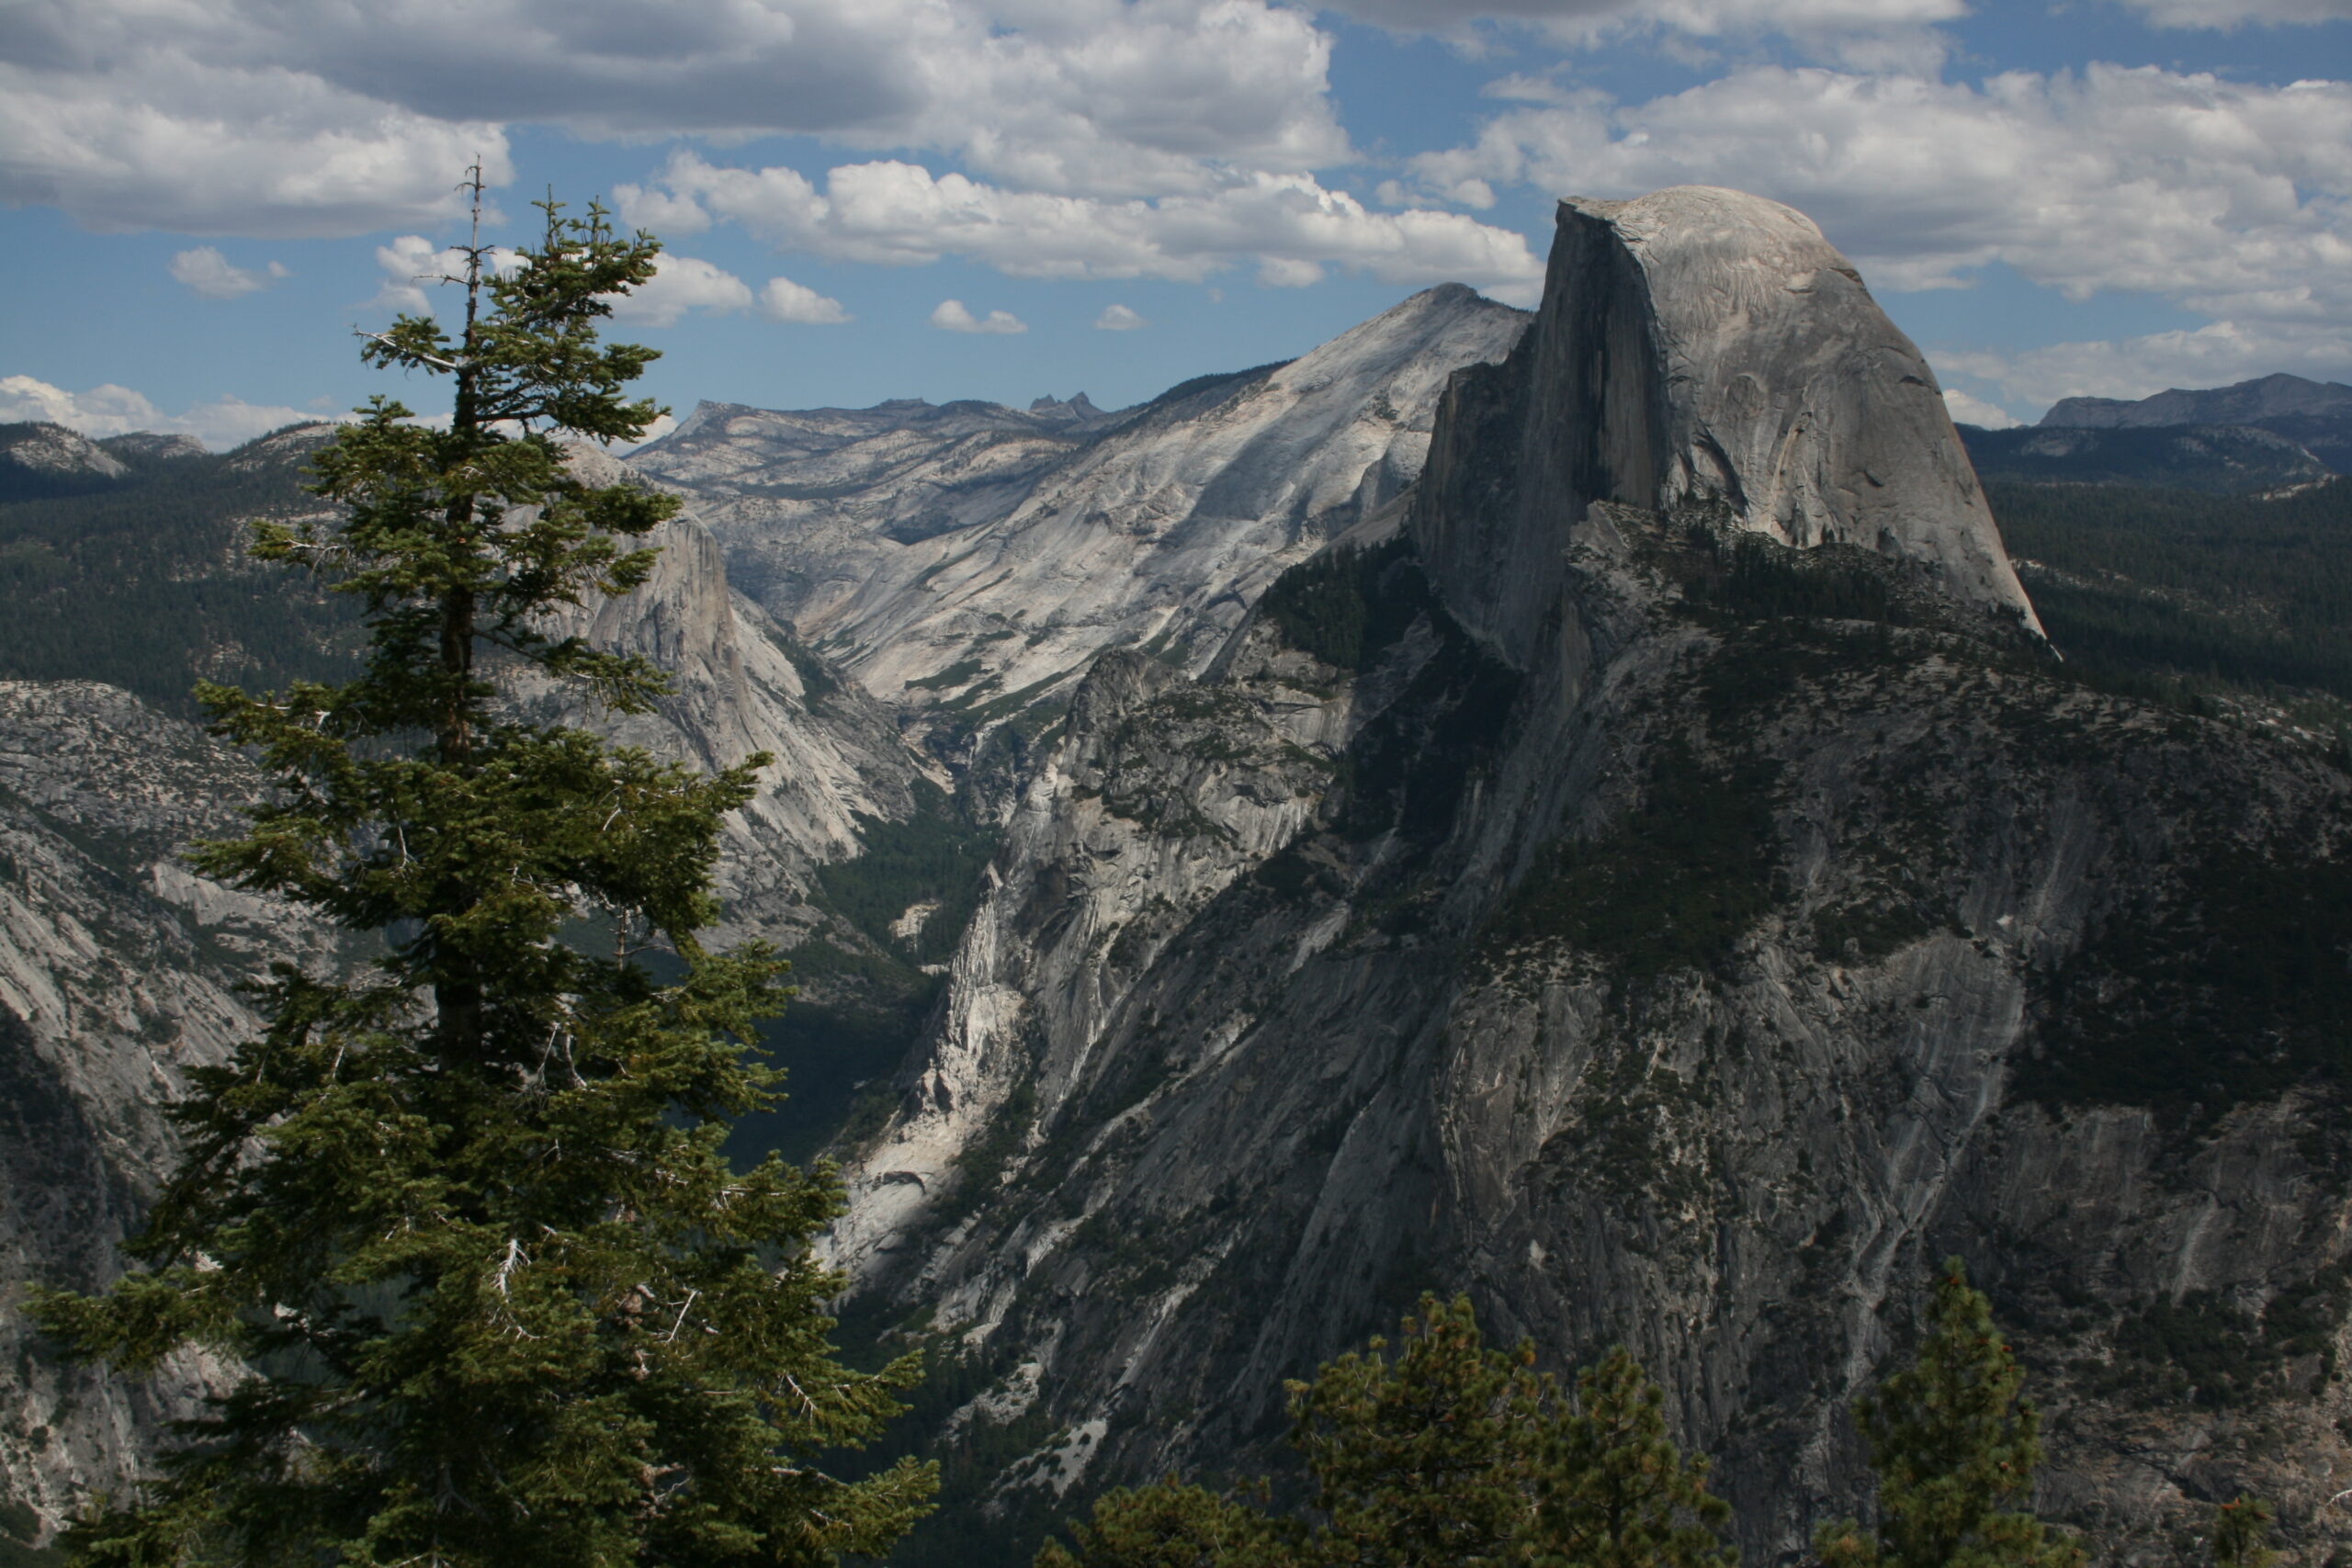 A view of Half Dome in the Yosemite Valley, seen from Glacier Point